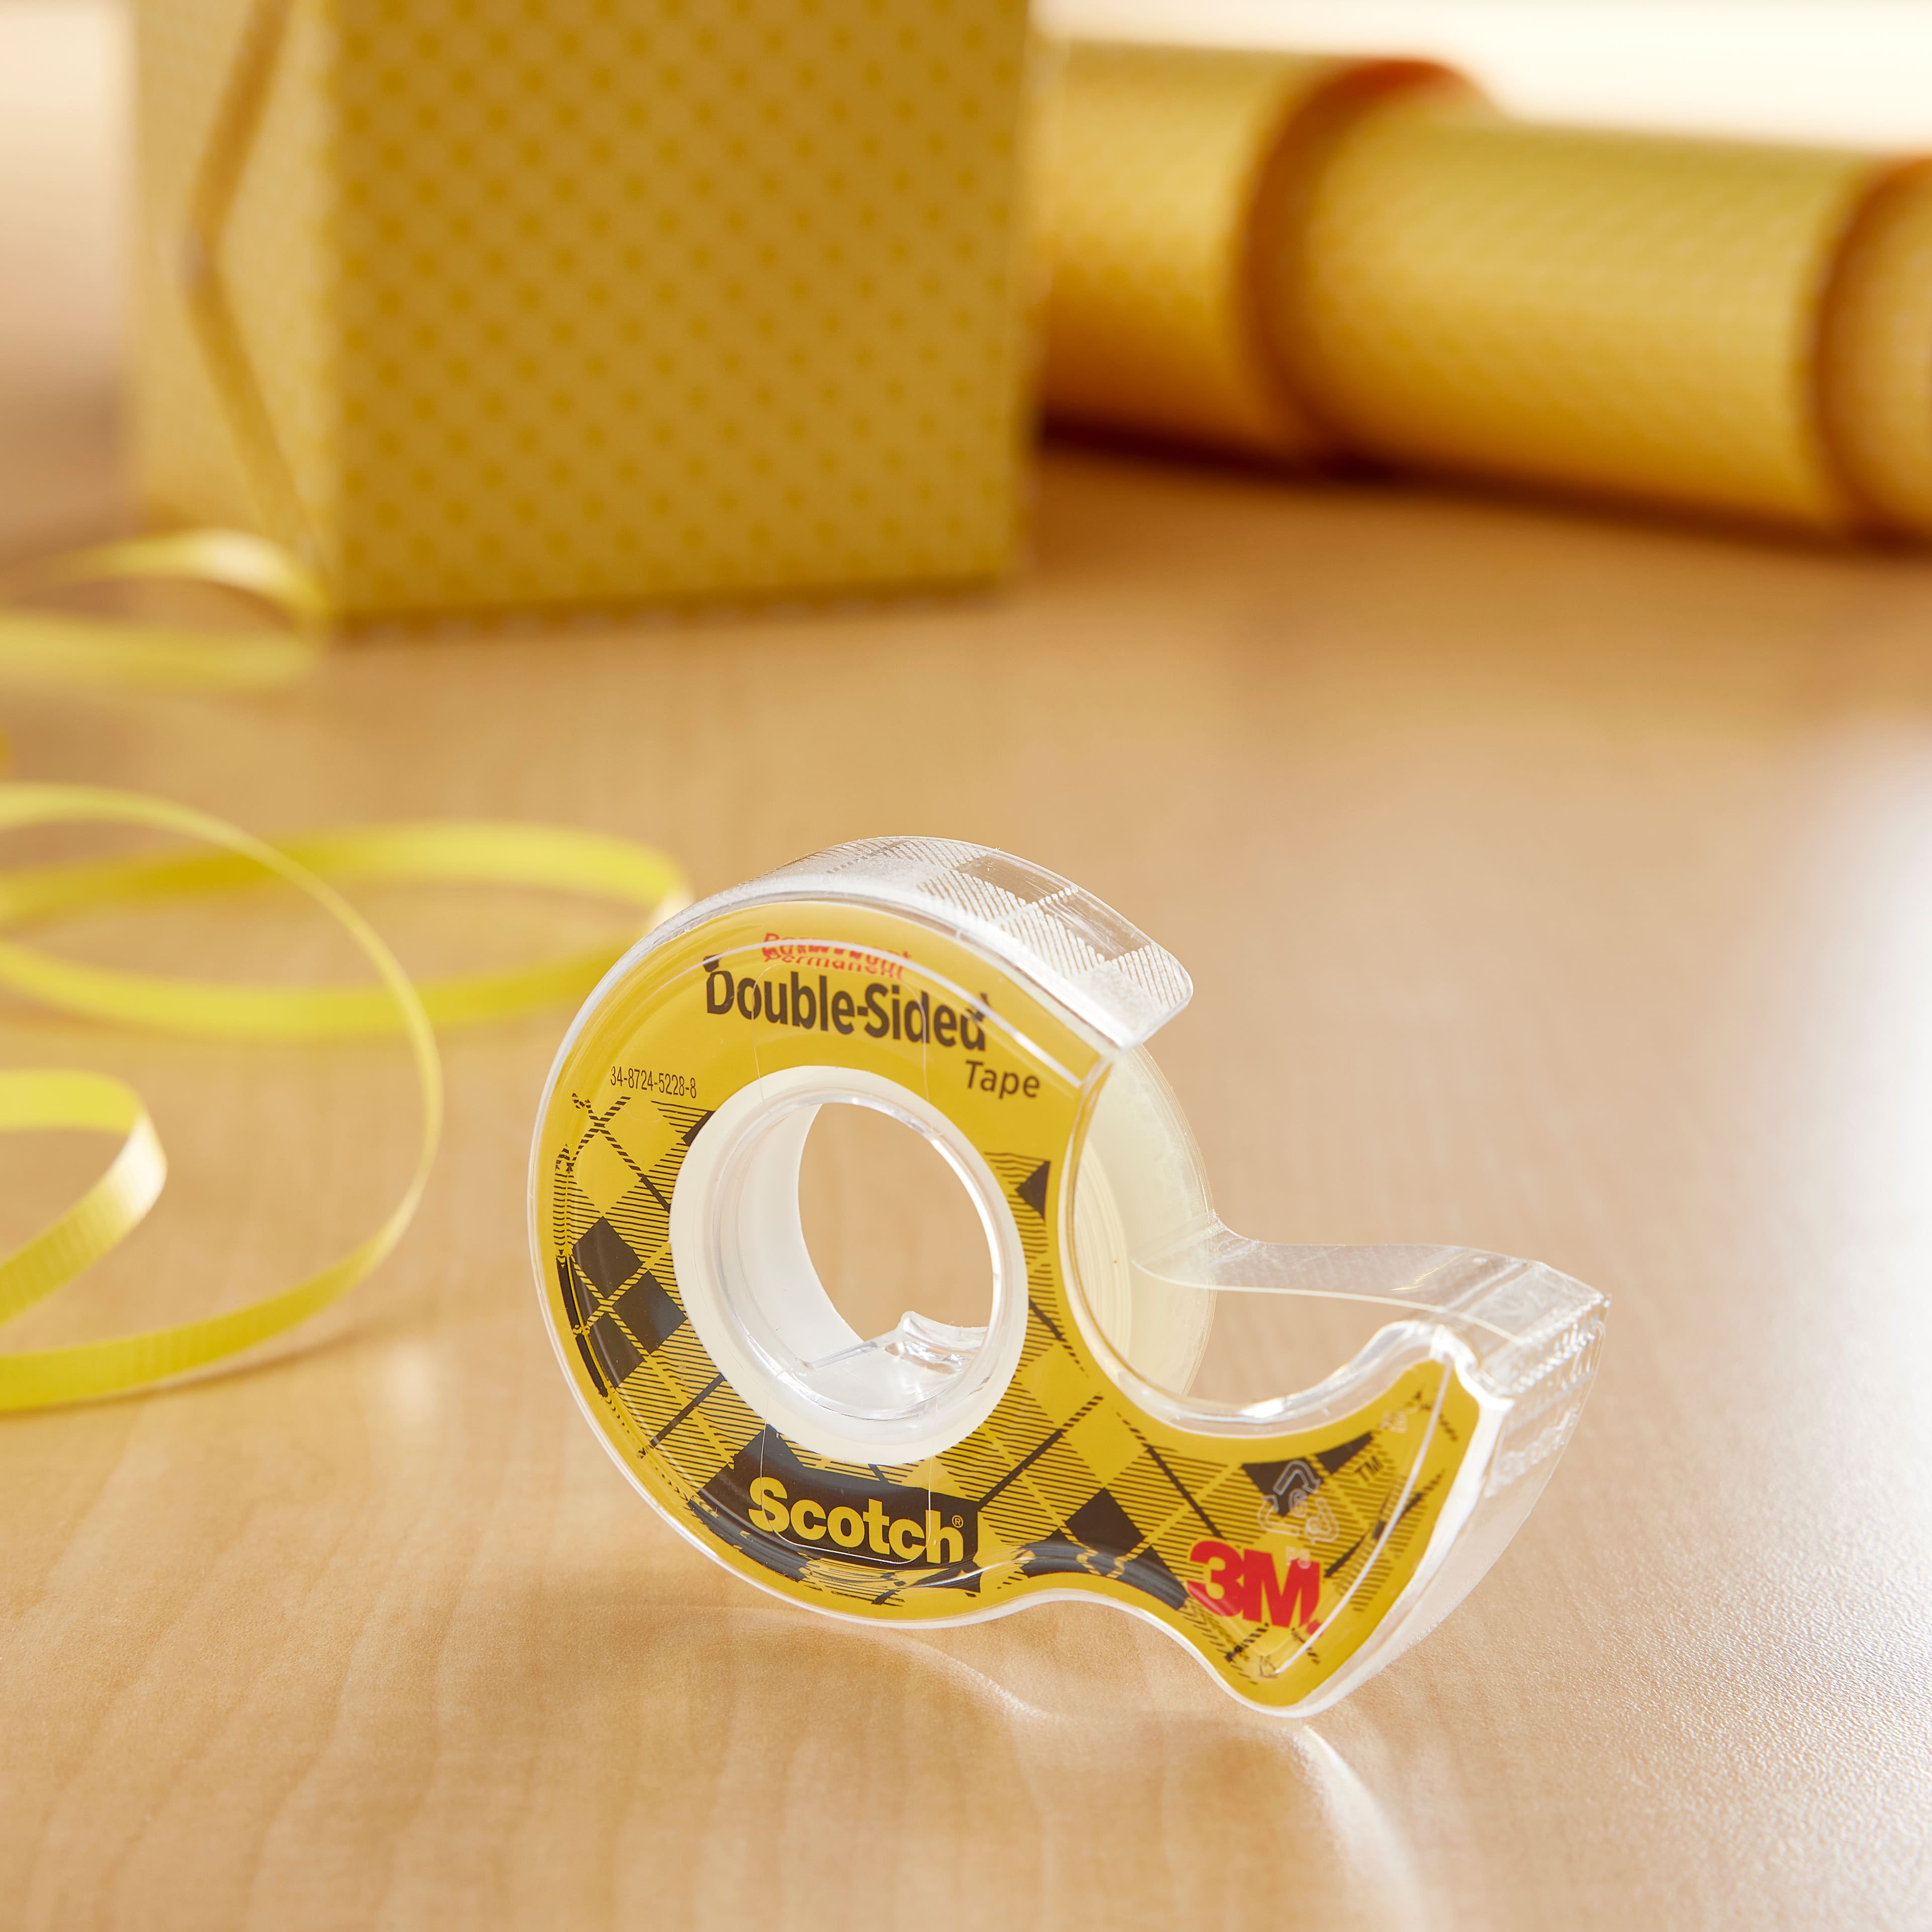 12 Packs: 3 ct. (36 total) Scotch® Double Sided Tape